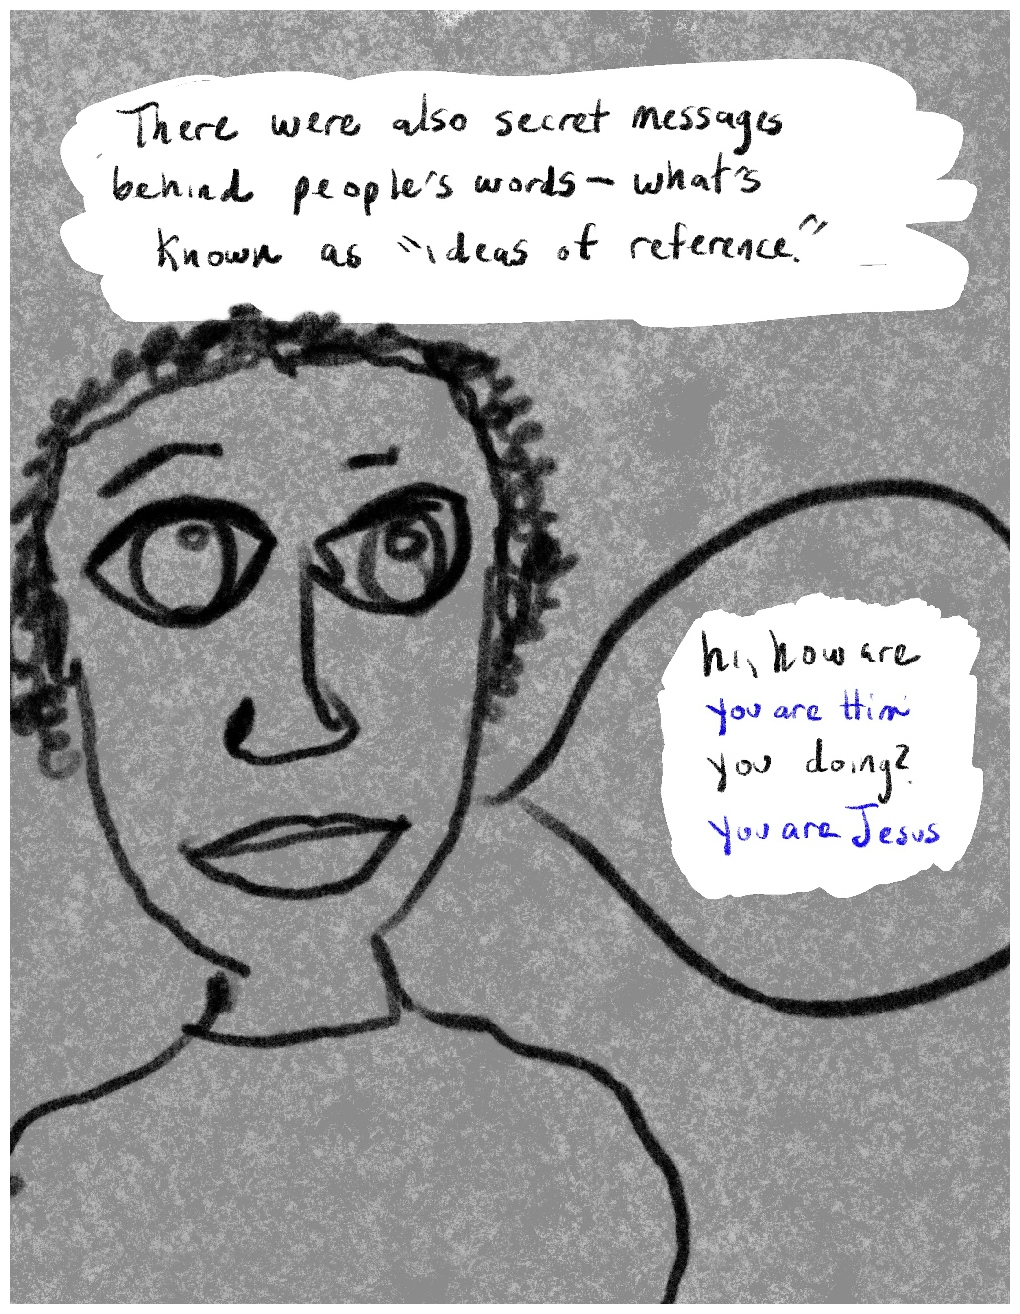 Panel 6 of a six-panel comic called 'Walled in by psychosis', consisting of thick black line drawing on a mottled grey background. A block of text at the top of the panel says, "There were also secret messages behind people's words - what's known as "ideas of reference". " The crudely drawn head and shoulders of a figure with large eyes and short curly hair fill most of the panel. A speech bubble coming from the figure says "[in black text] hi, how are you doing? [and in blue text beneath the black text] You are Him, You are Jesus " 